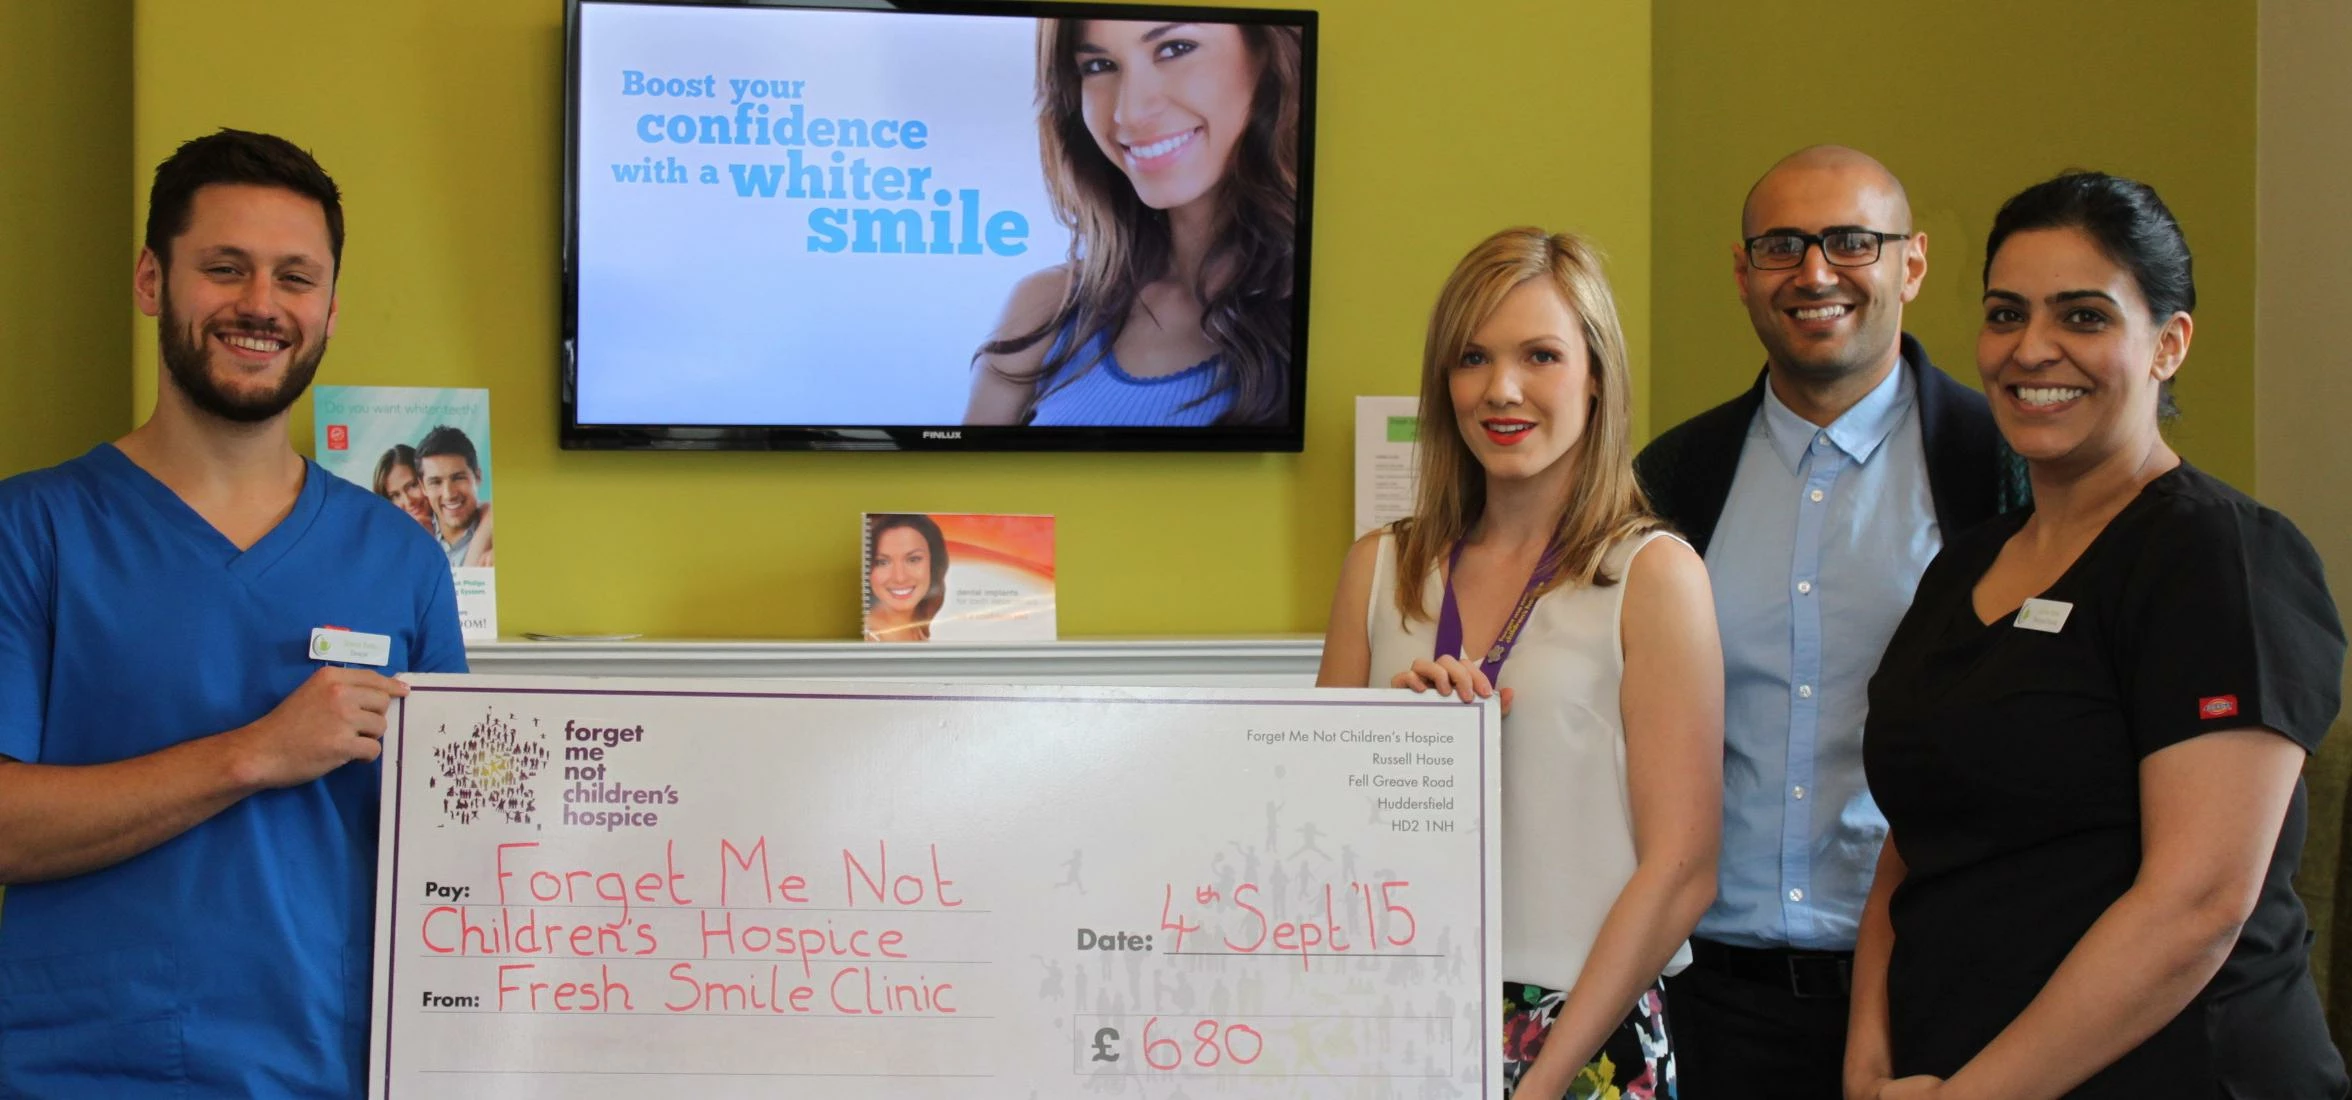 Fresh Smile Clinic raises almost £700 for Forget Me Not Children's Hospice 